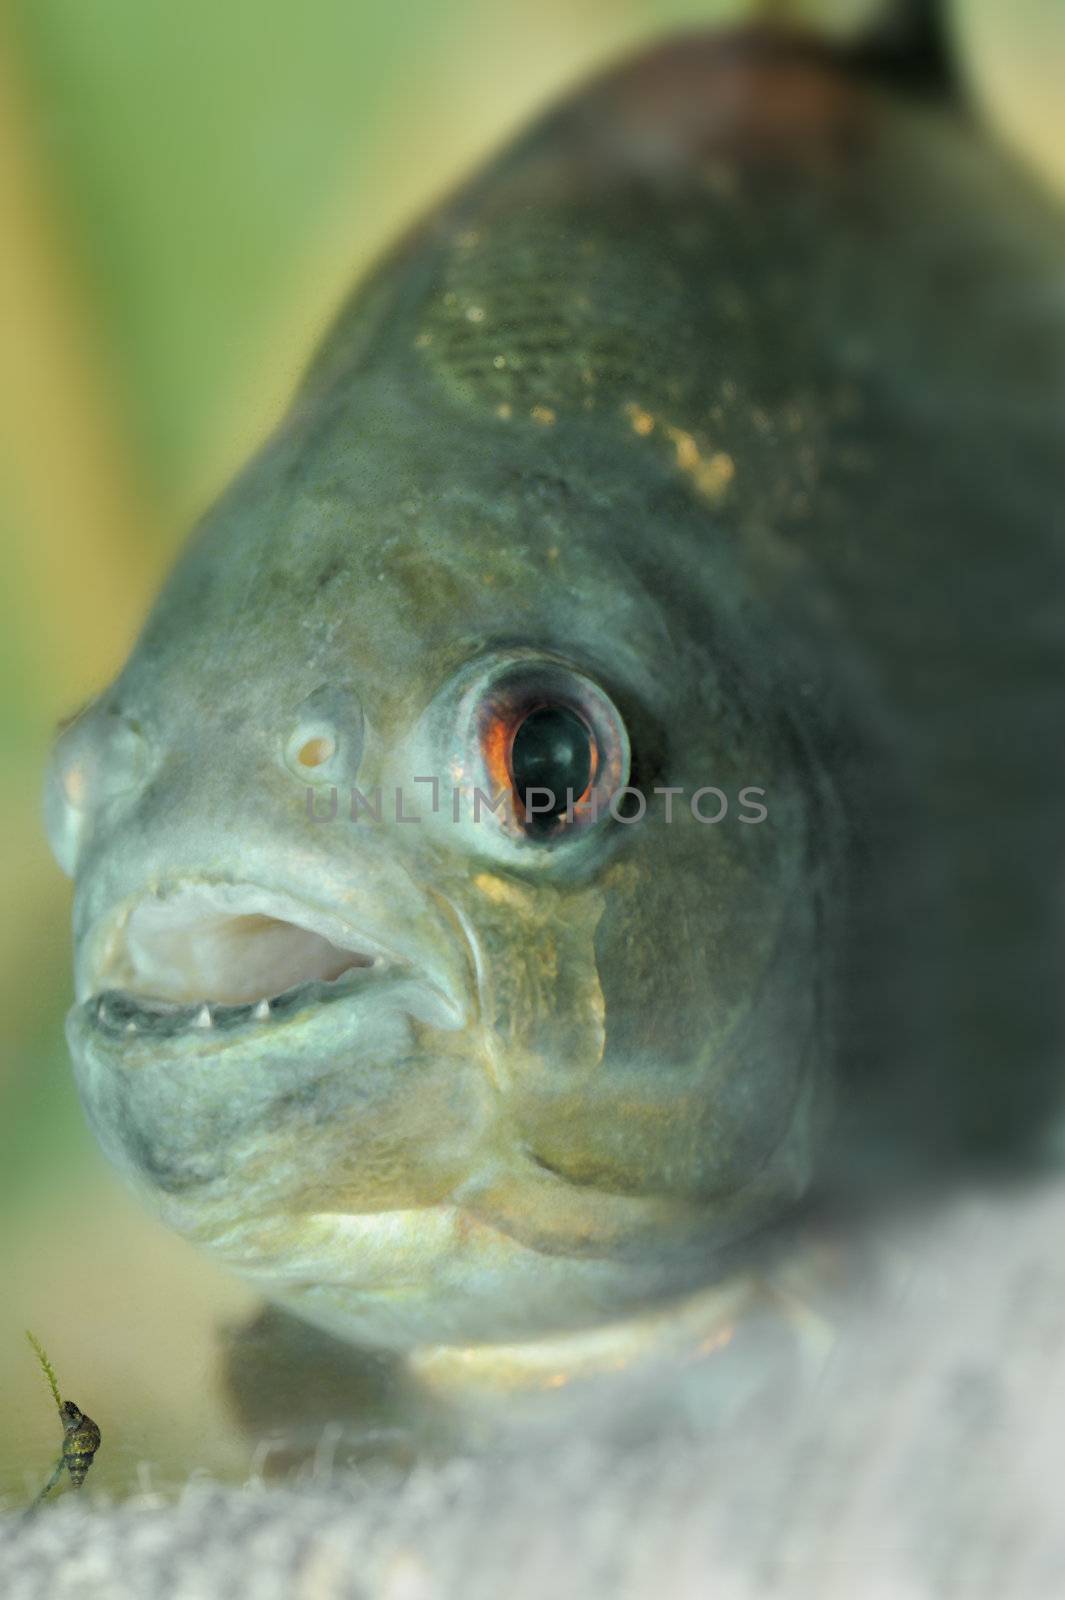 piranha.predatory fish found in South America that attacks other fish animals and occasionally humans